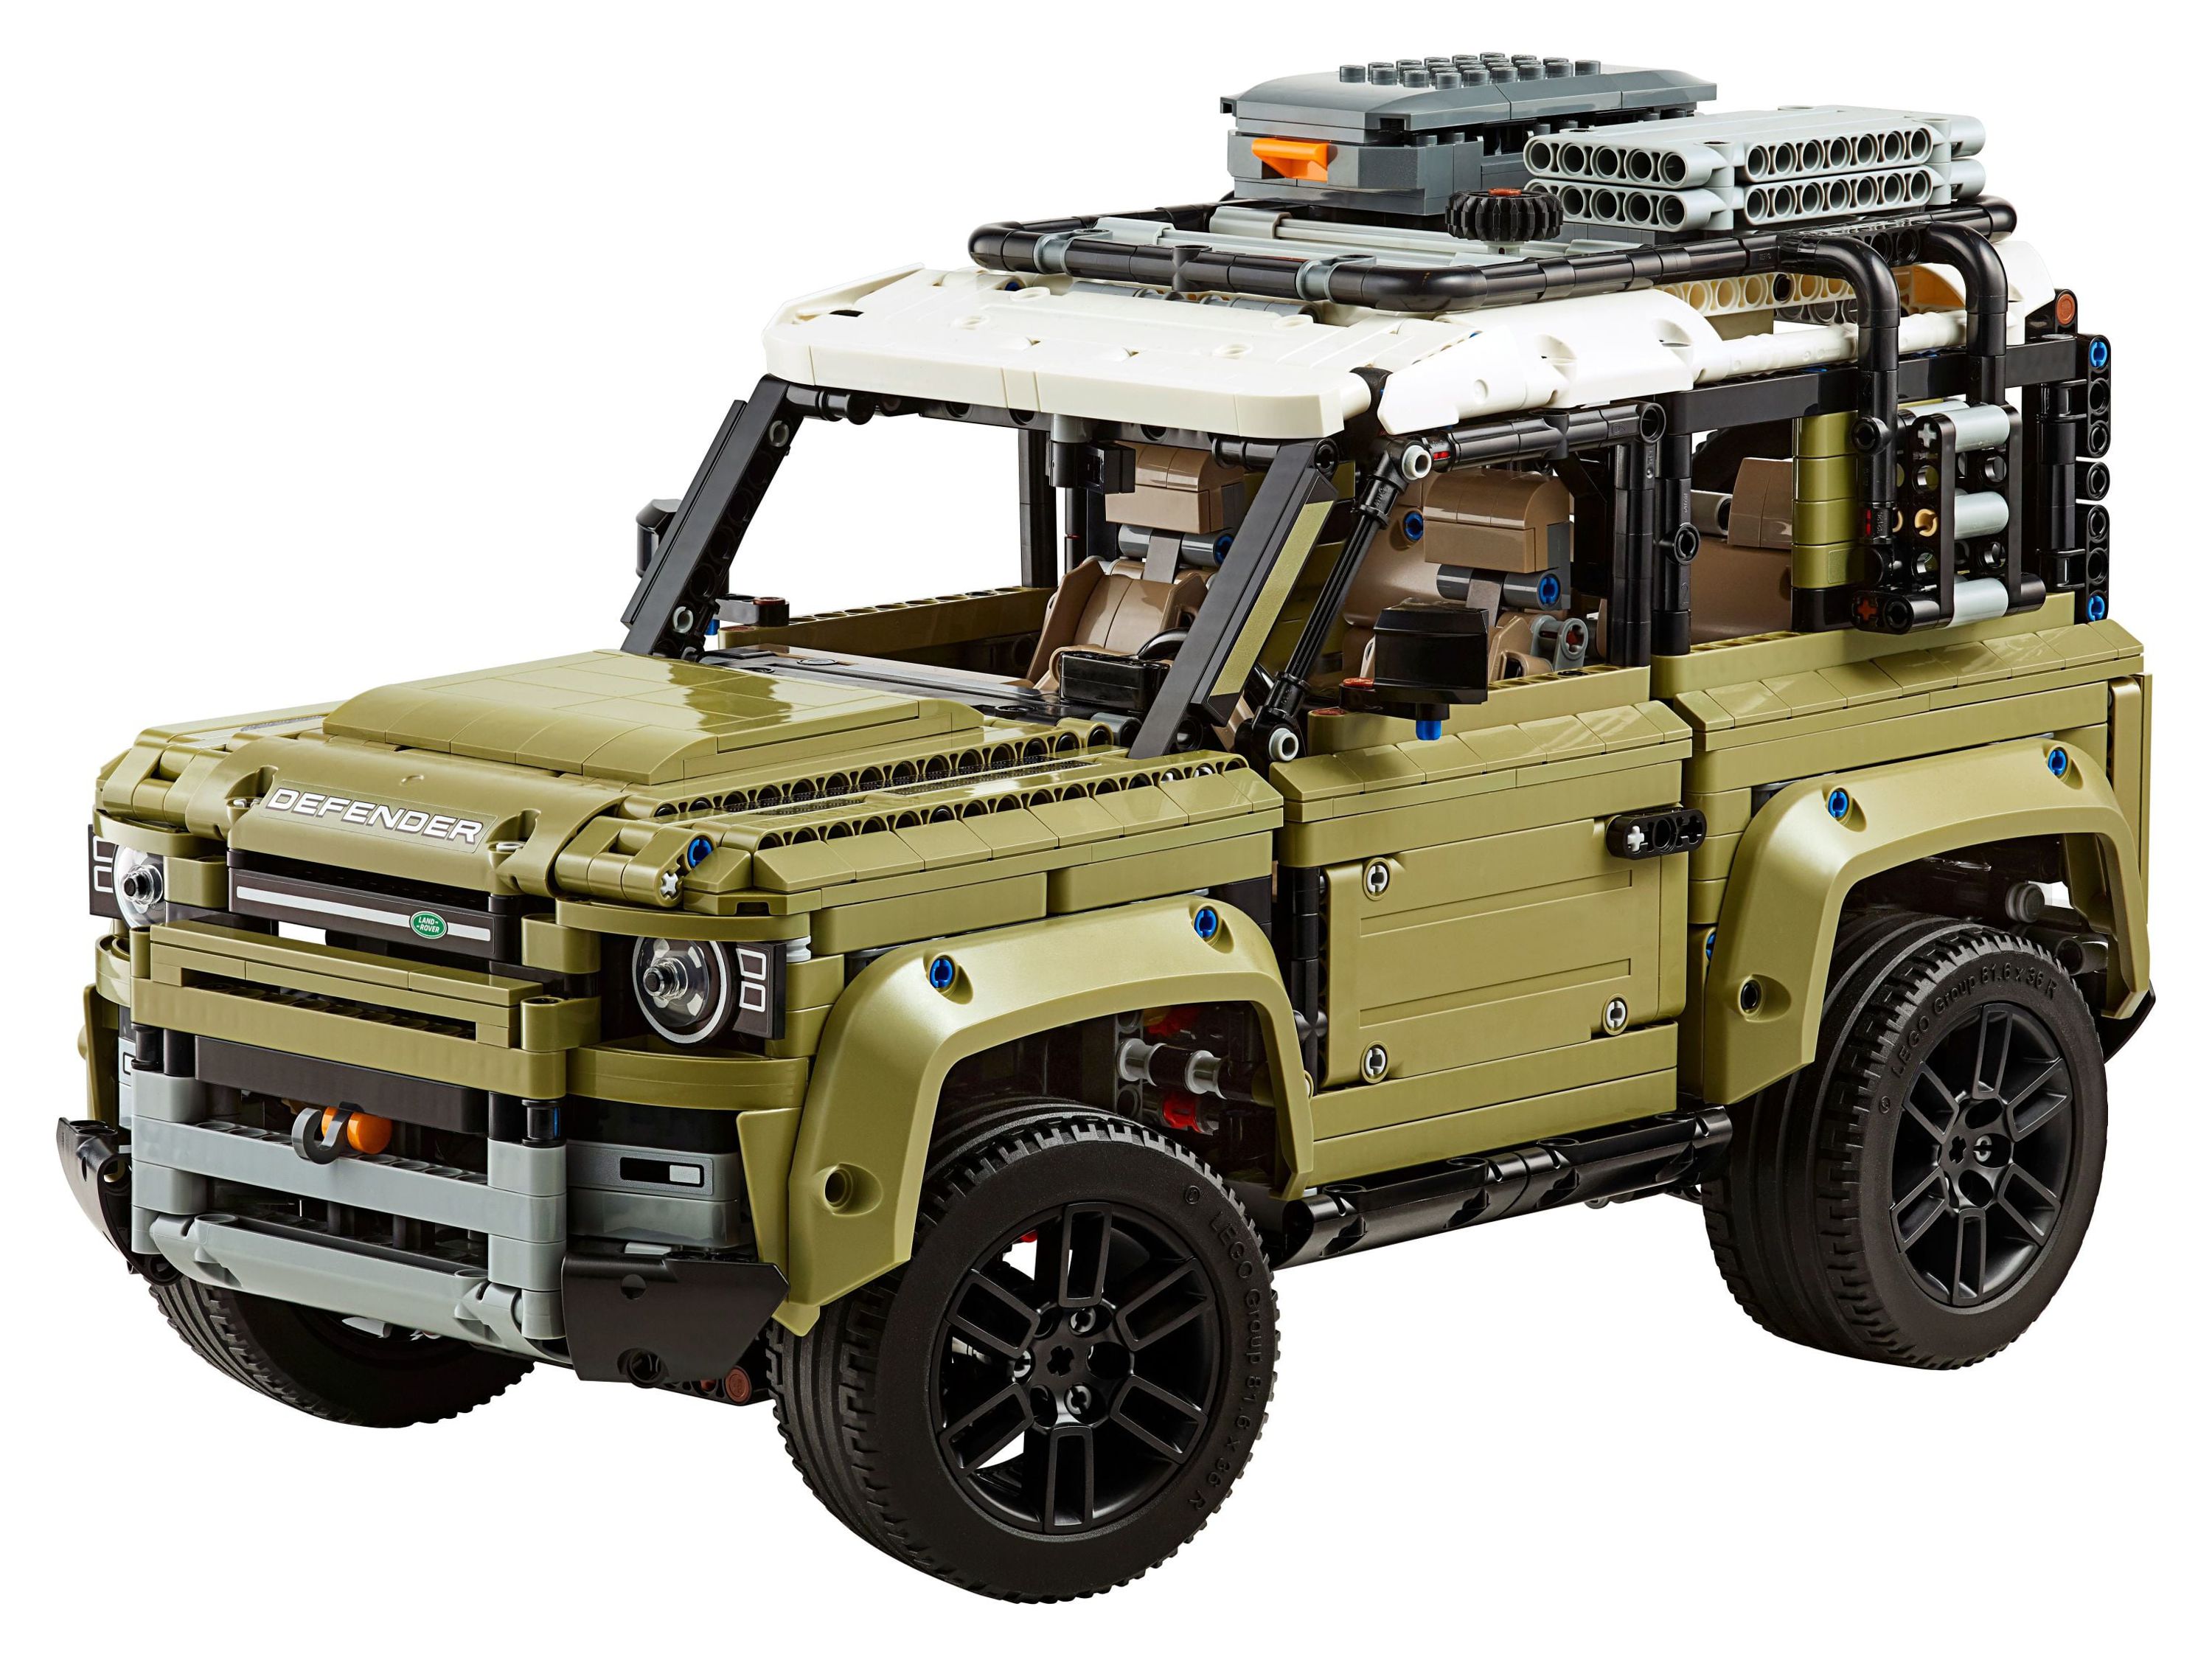 LEGO Technic Land Rover Defender 42110 - image 3 of 7